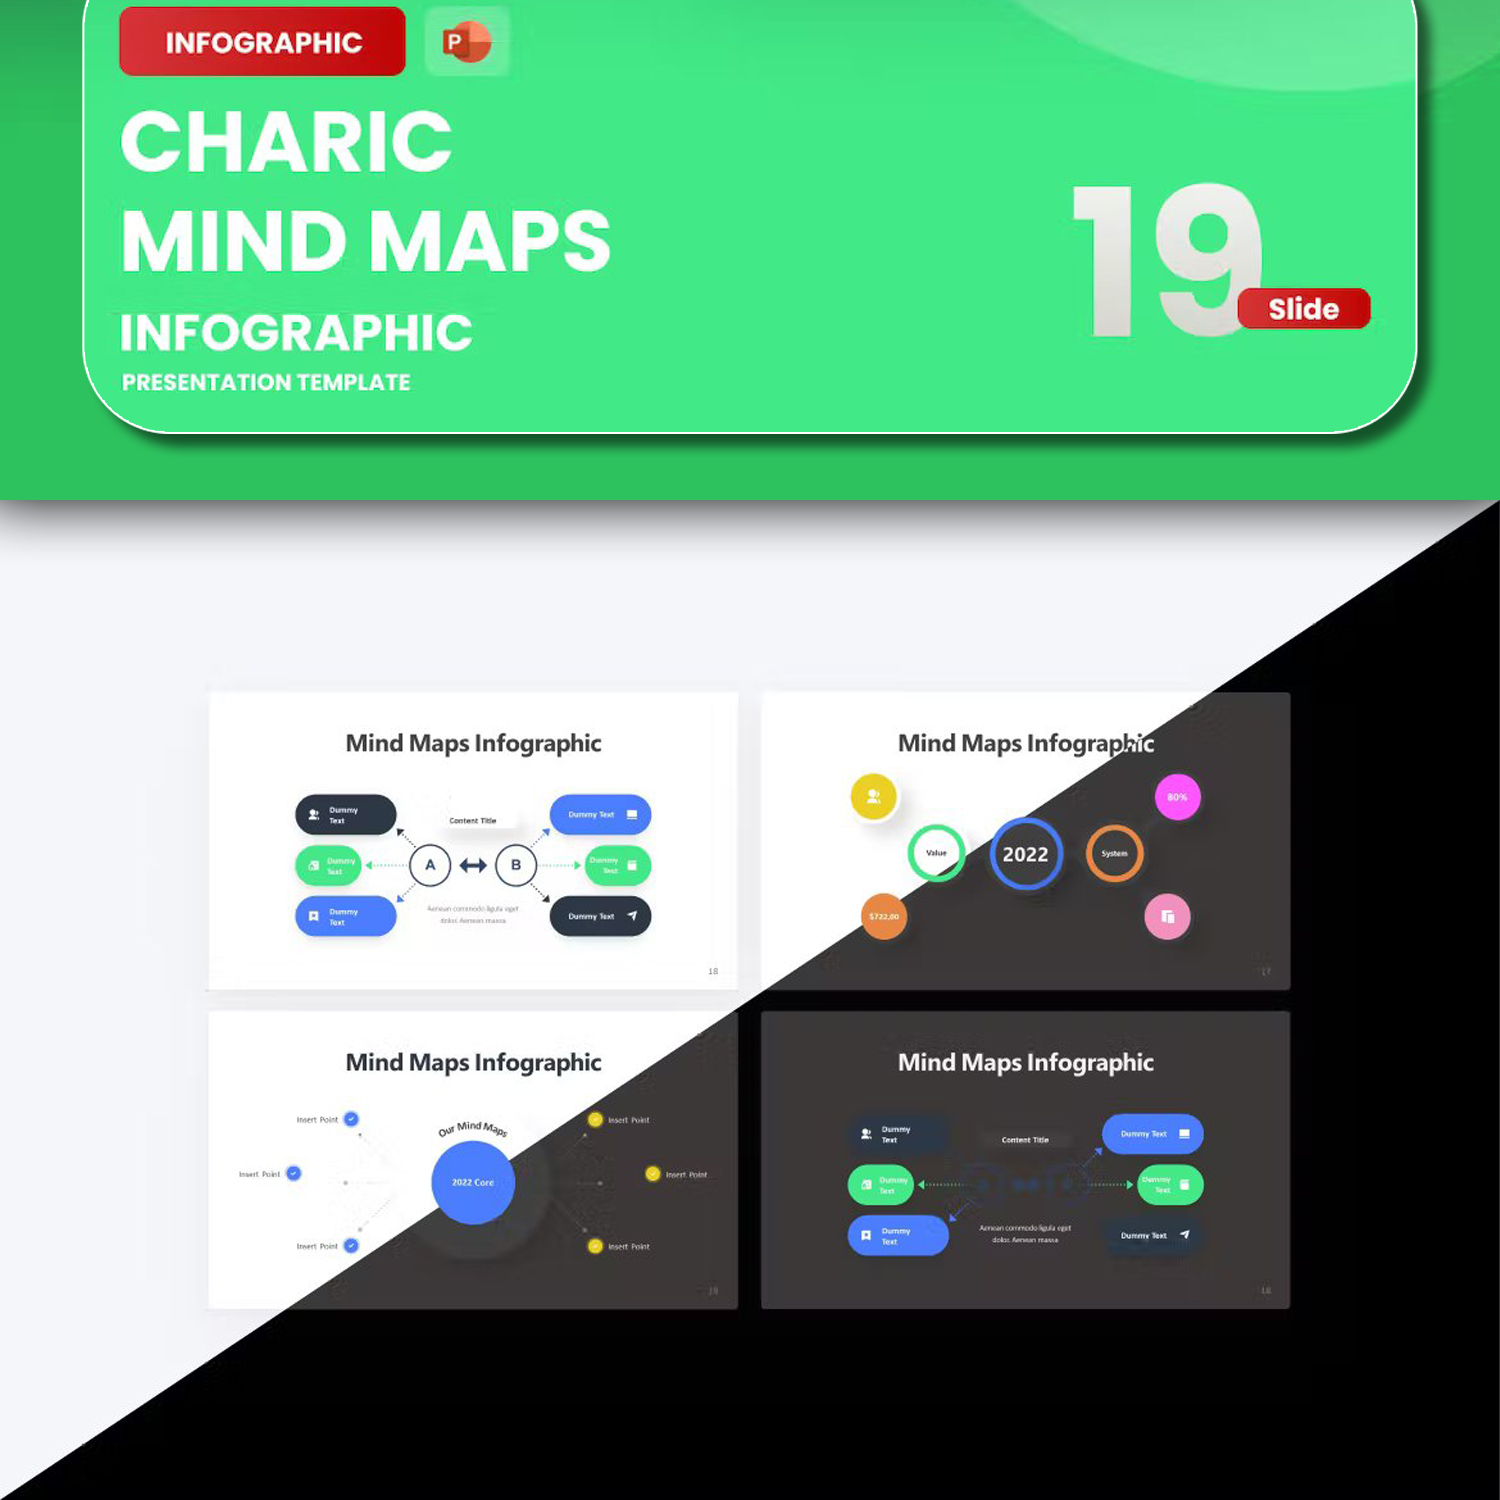 Charic Mind Maps Infographic PowerPoint Template.